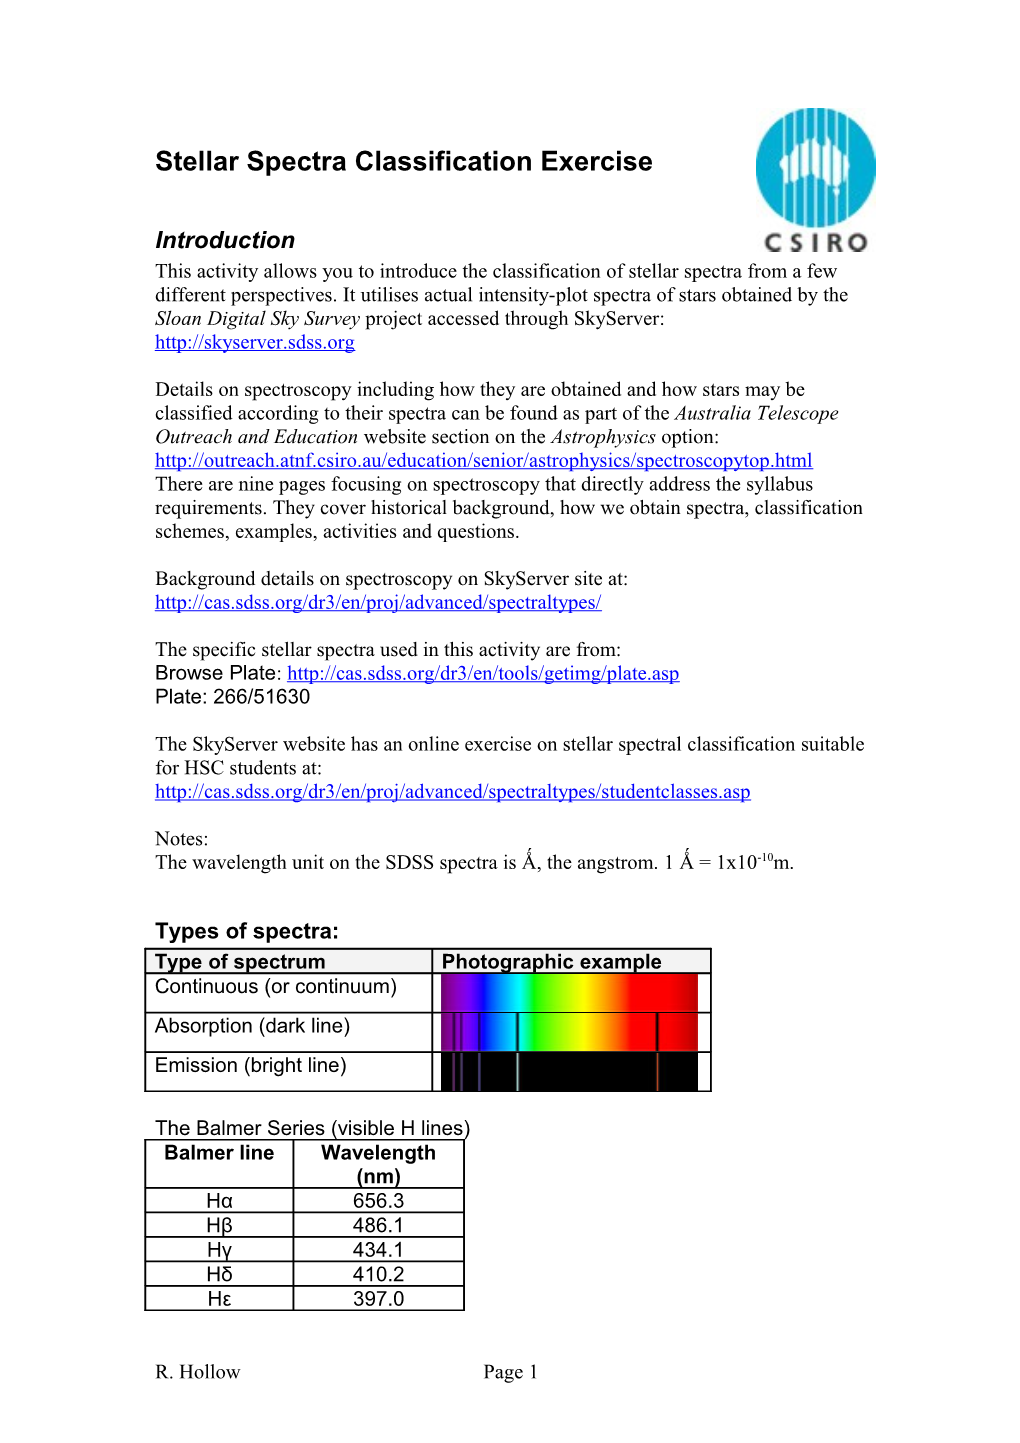 Stellar Spectra Classification Exercise